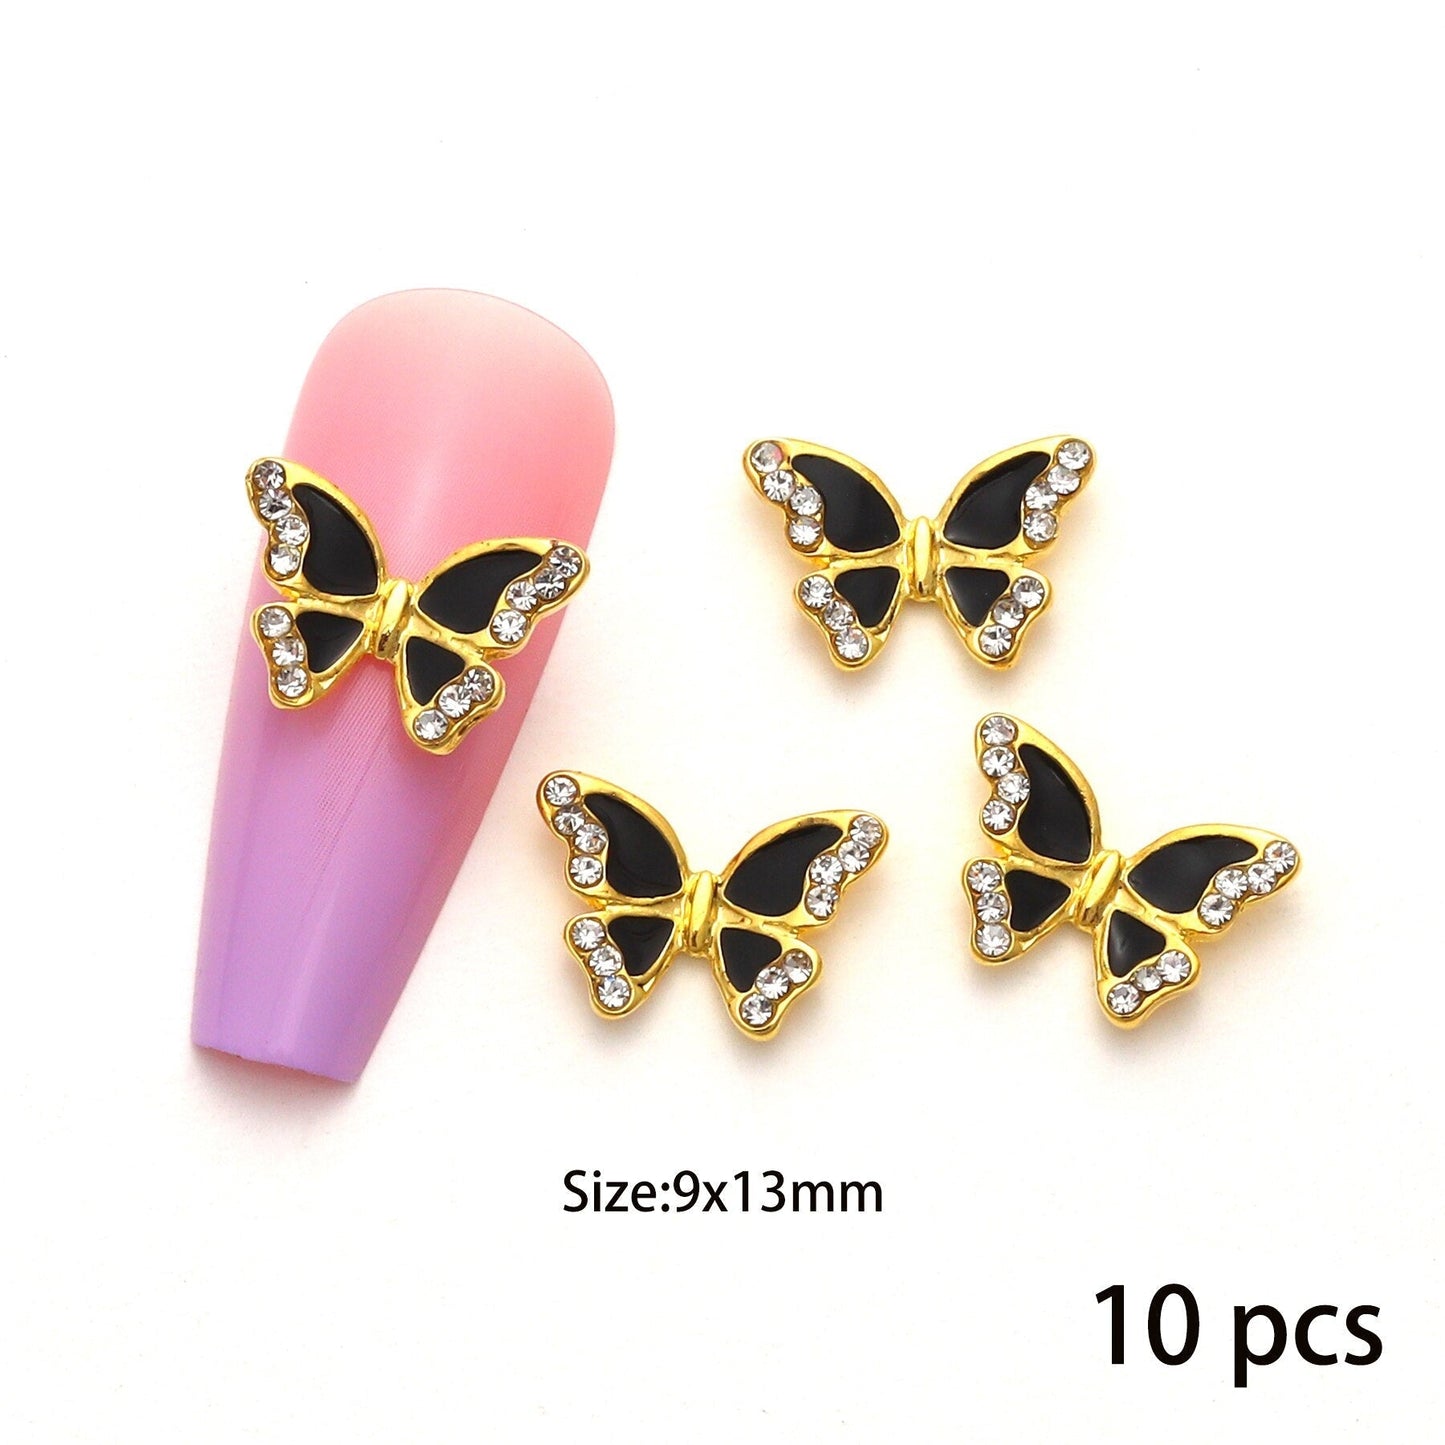 10 Pcs/pack Butterfly Alloy Nail Charms 3D Butterfly Zircon Diamond Rhinestone Nails Jewelry DIY Nail Art Decoration Accessories